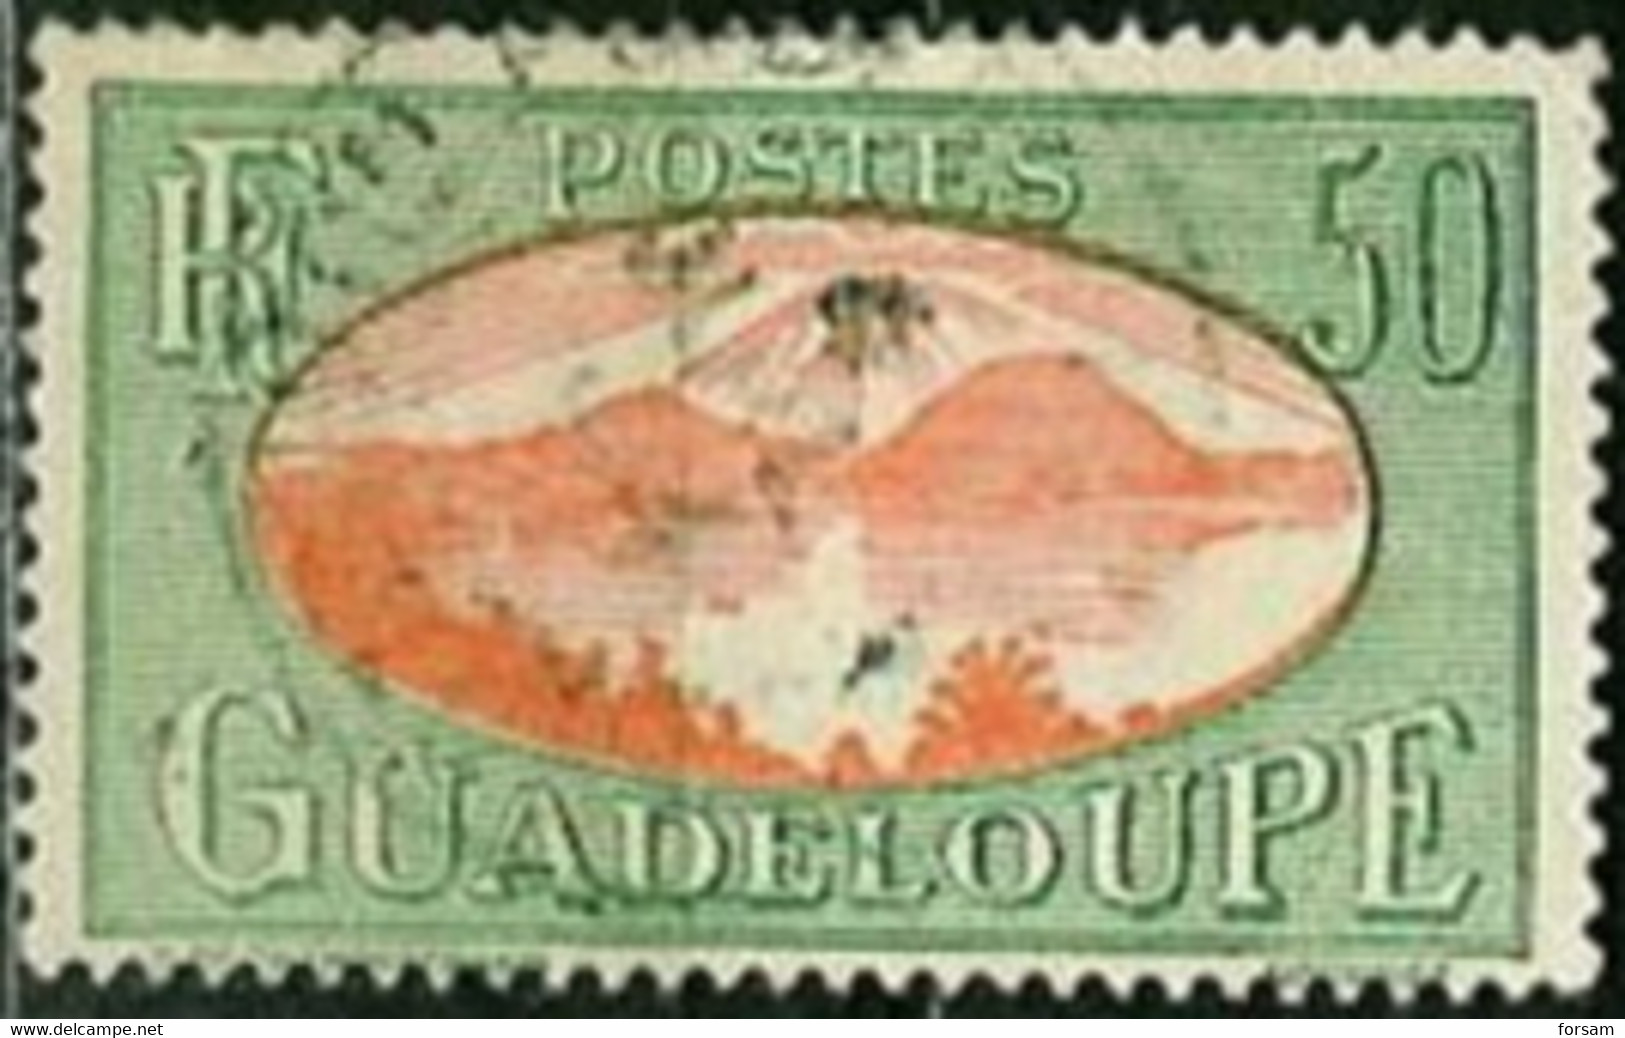 GUADELOUPE..1928..Michel # 108...used. - Used Stamps